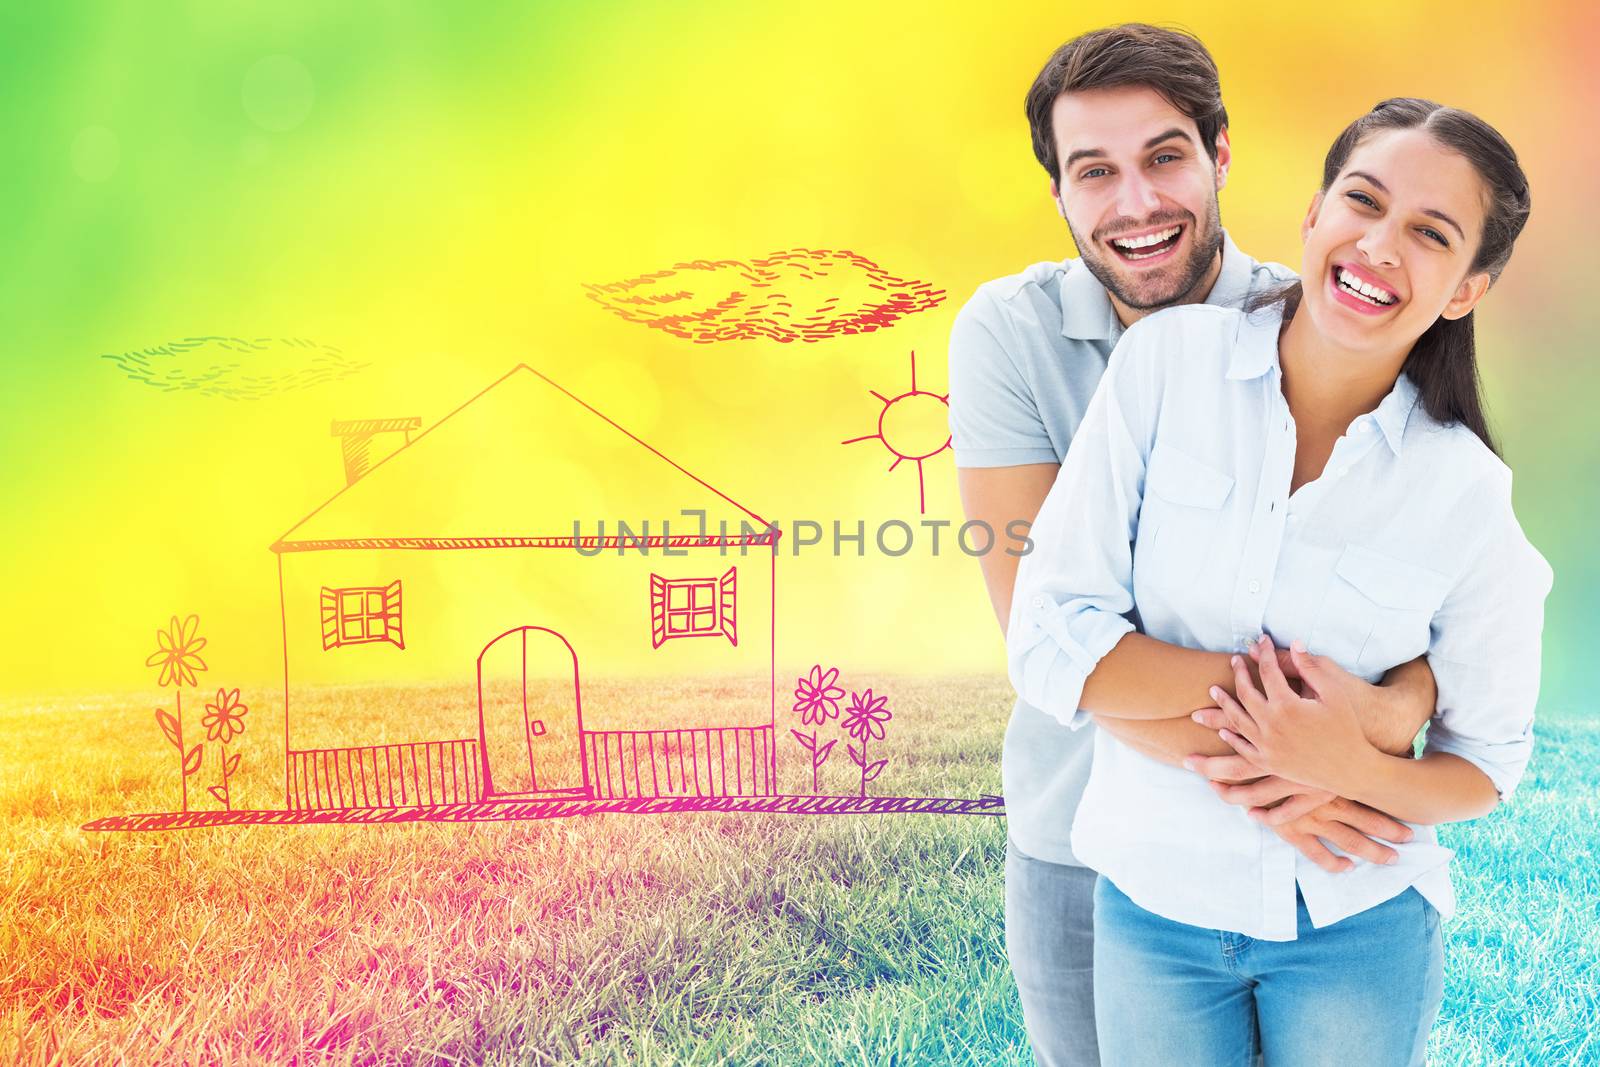 Cute couple hugging and smiling at camera against field against glowing lights